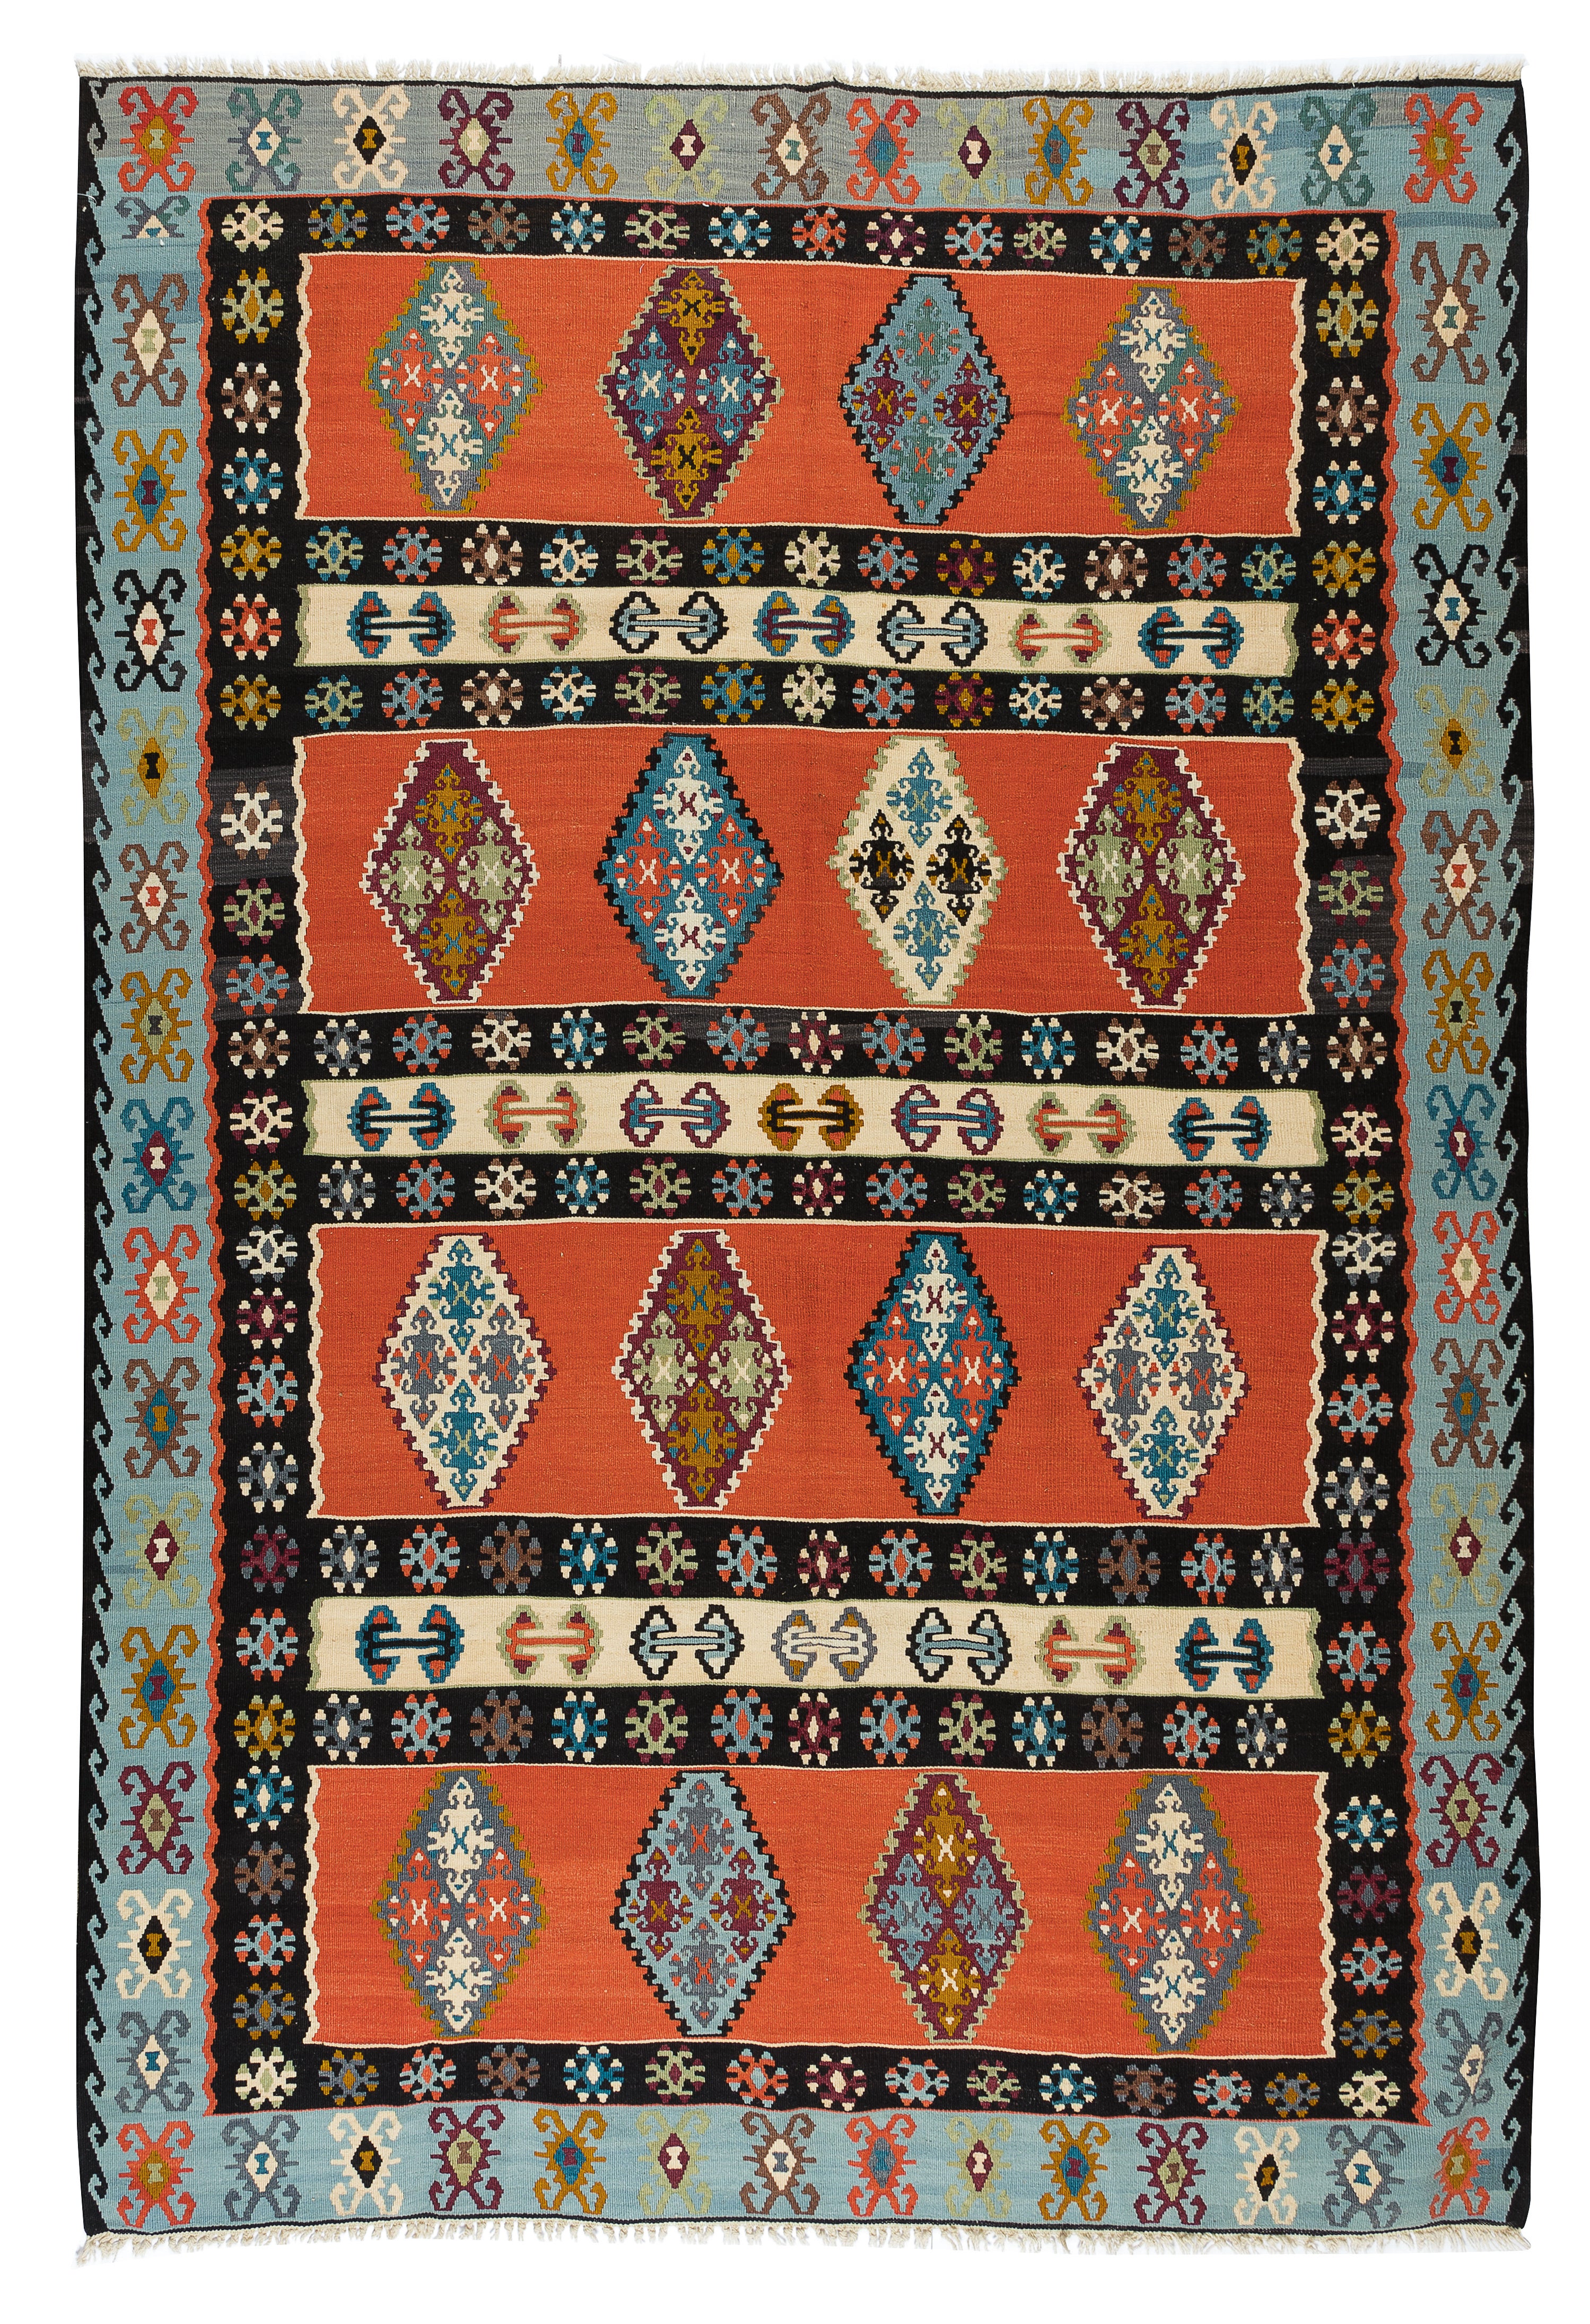 7x9.8 Ft Vintage Geometric Pattern Hand-Woven Turkish Kilim Rug in Red & Blue For Sale